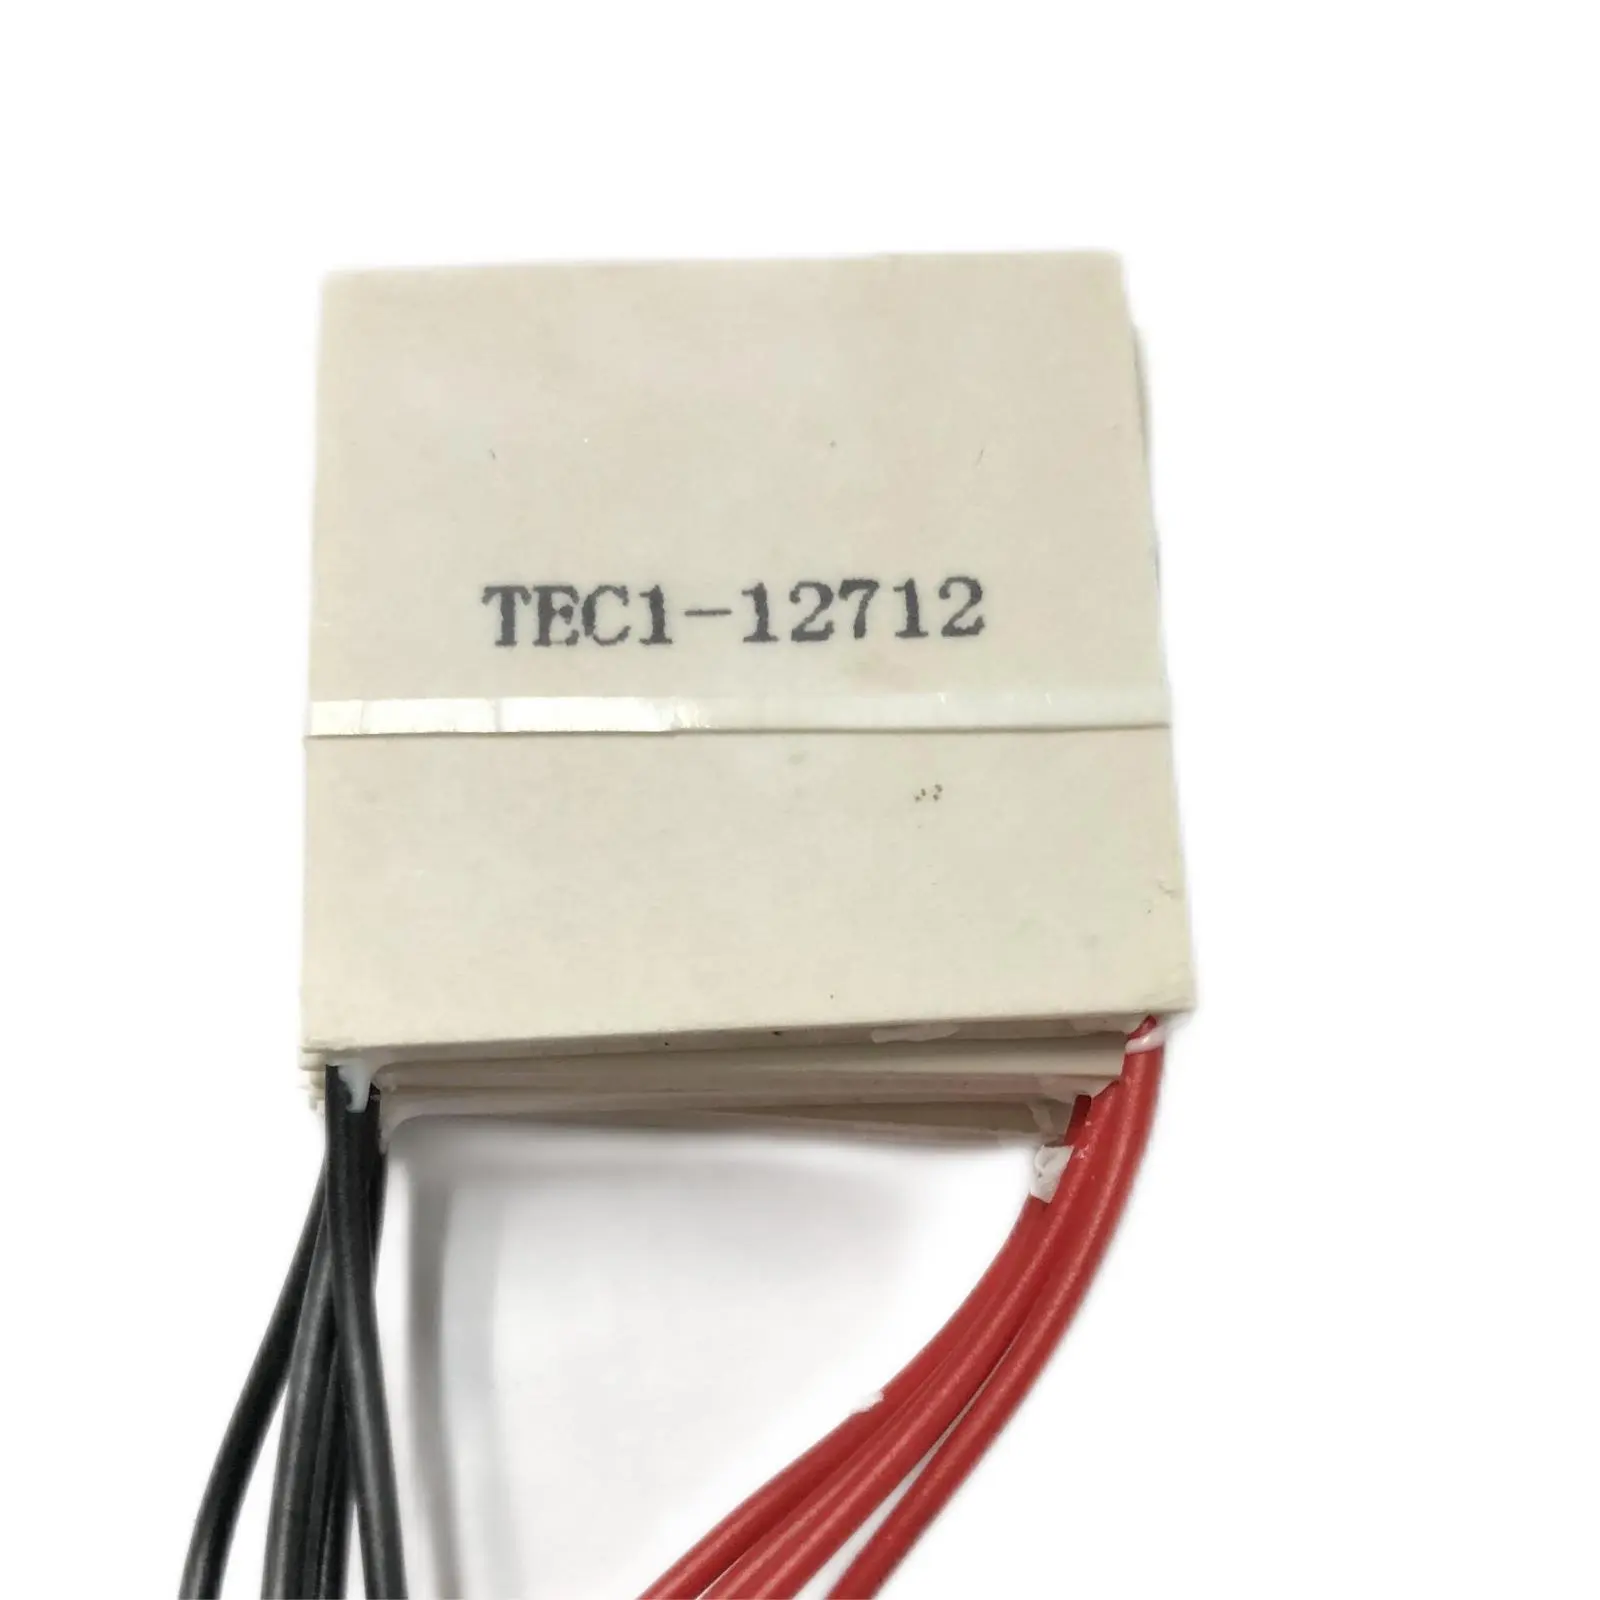 TEC1-12712 12V 12A 40*40MM Heatsink Thermoelectric Cooler Cooling Peltier Plate Module